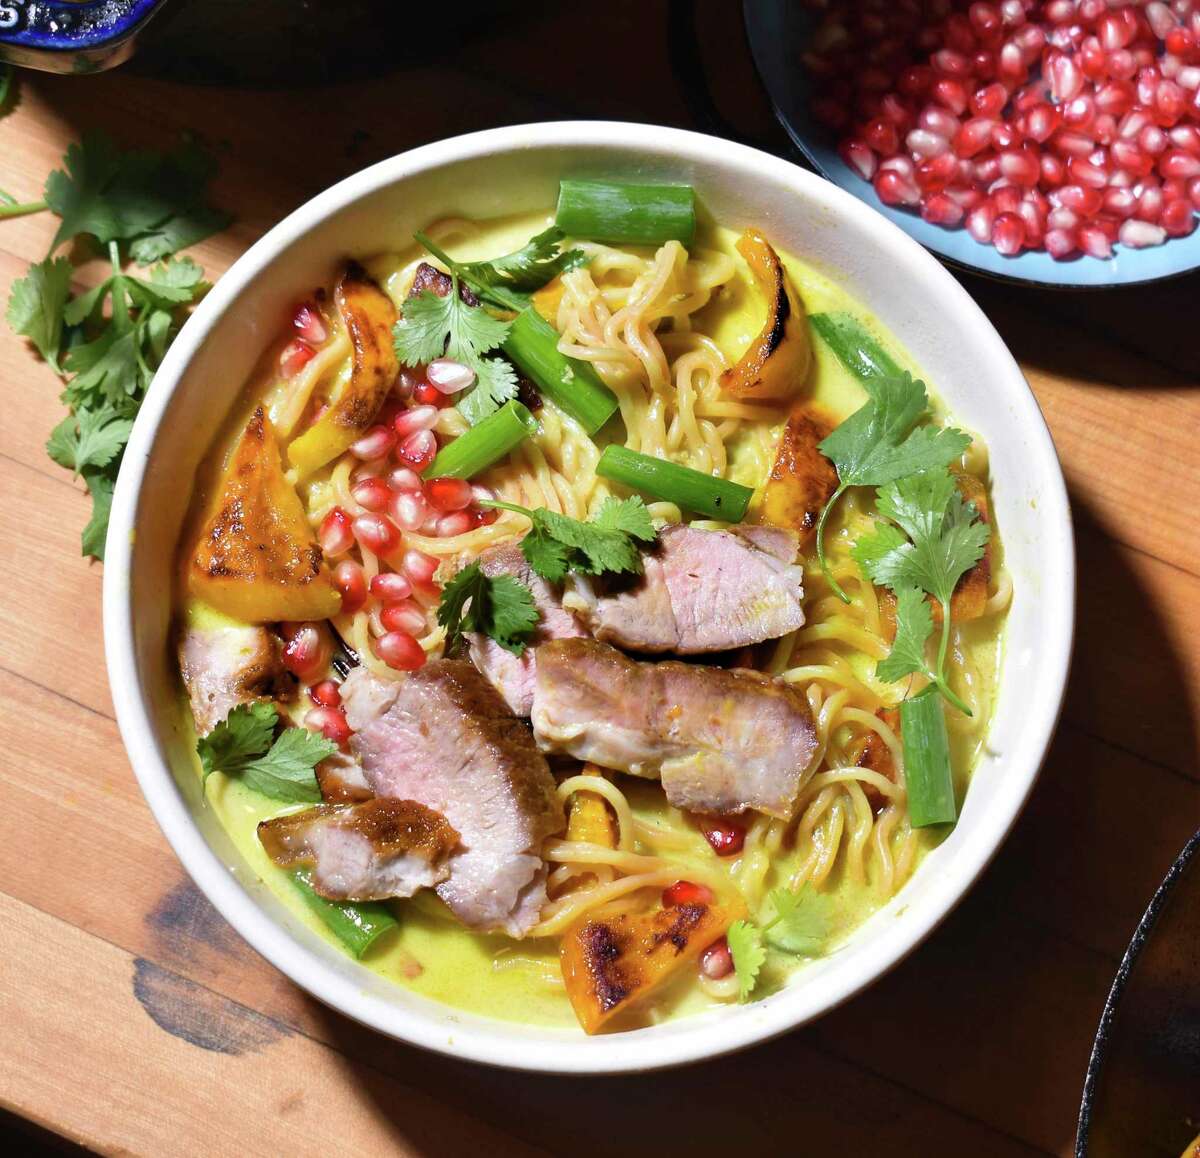 Roasted kabocha squash adds a sweet note to this ramen dish, and ginger and curry add warming notes of spiciness. Caramelized pork shoulder is the topper.